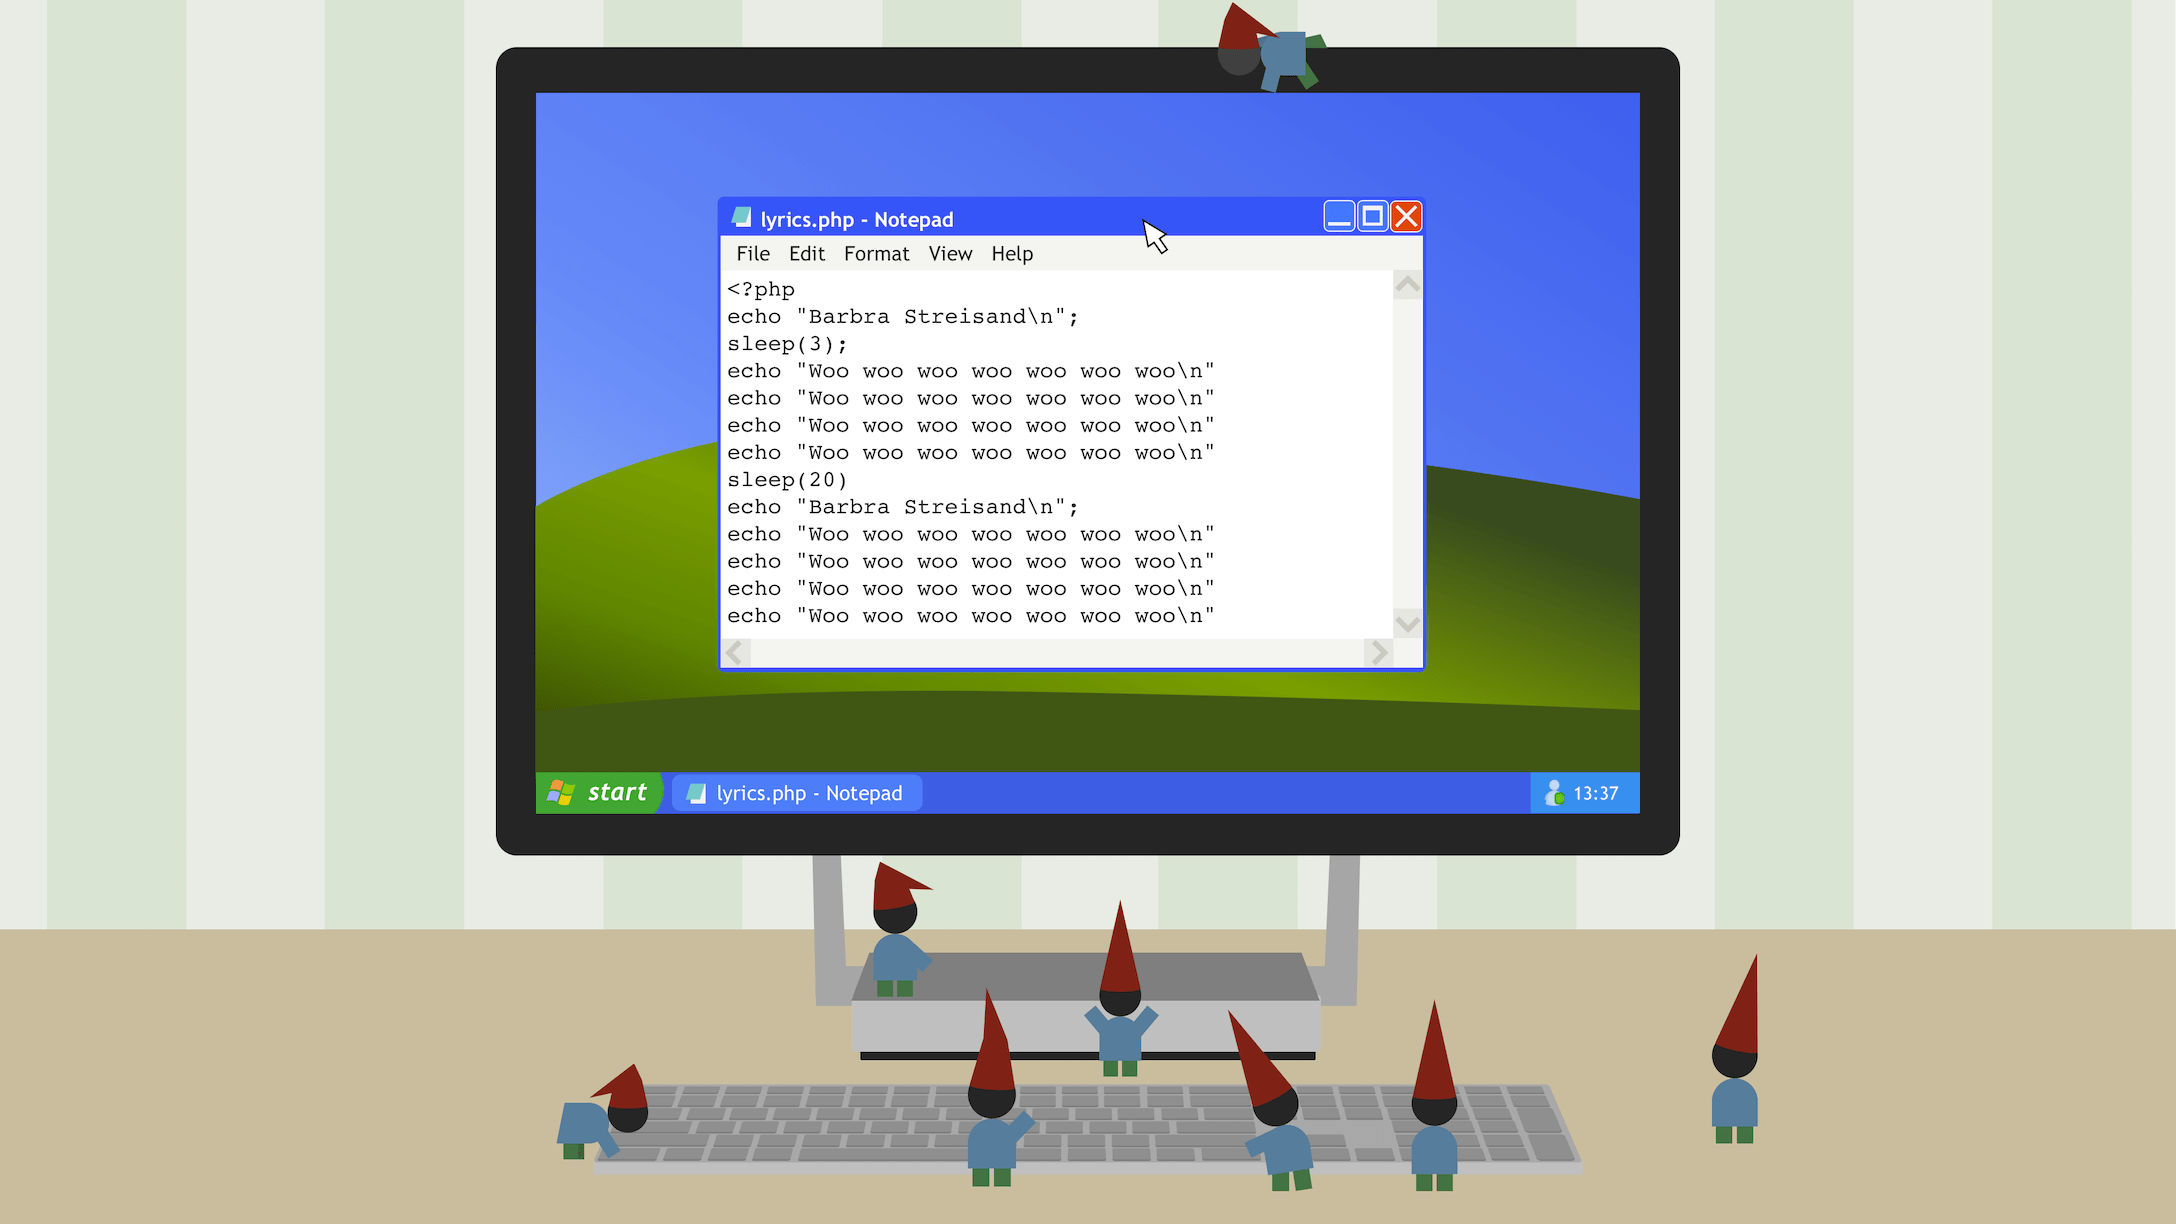 A group of gnomes use a Surface Studio to edit a PHP script that outputs lyrics for Duck Sauce’s Barbra Streisand
